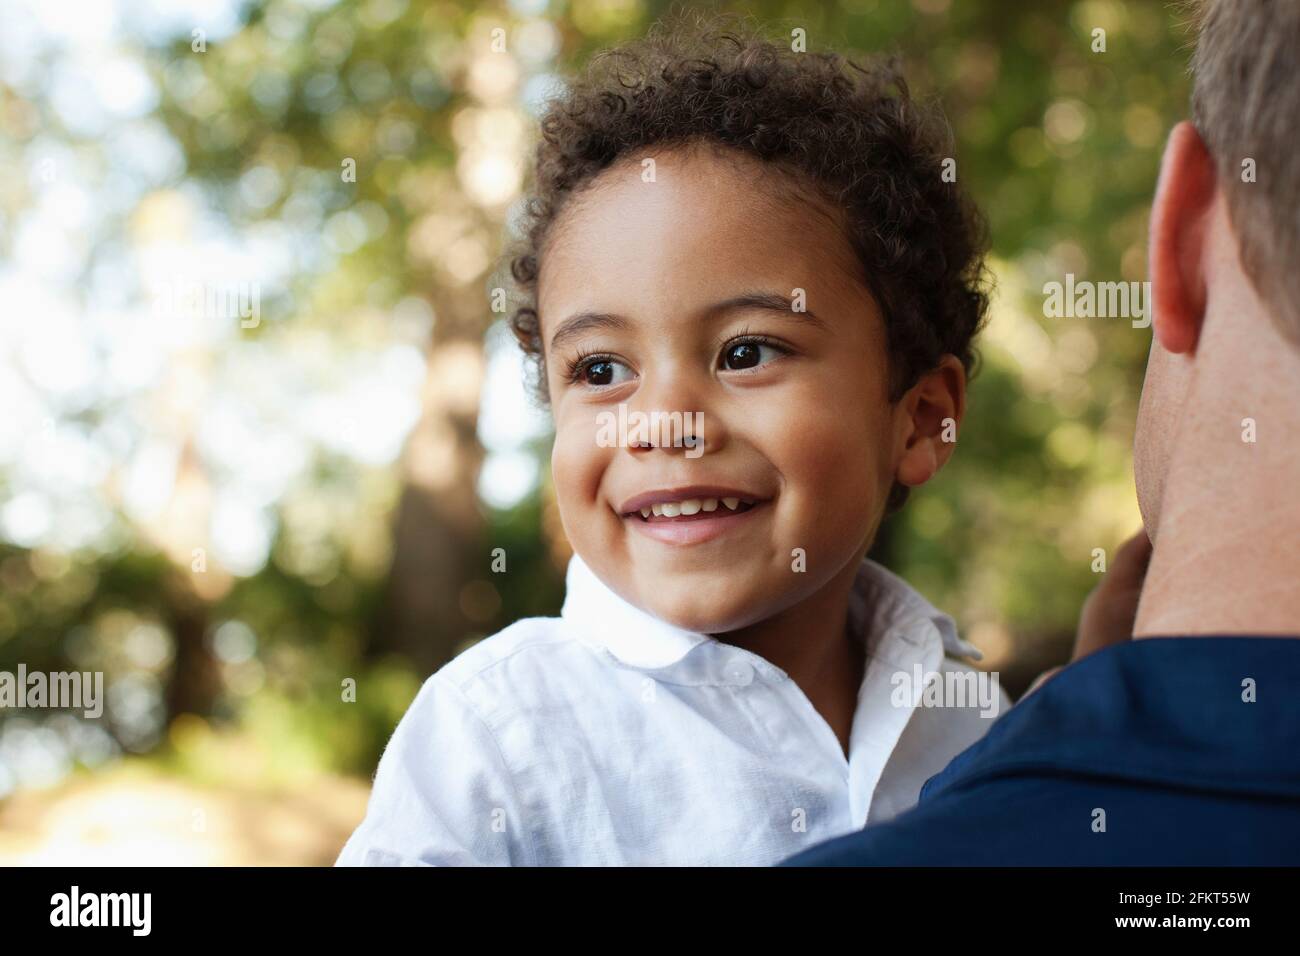 Over shoulder view of father carrying preschool boy looking away smiling Stock Photo